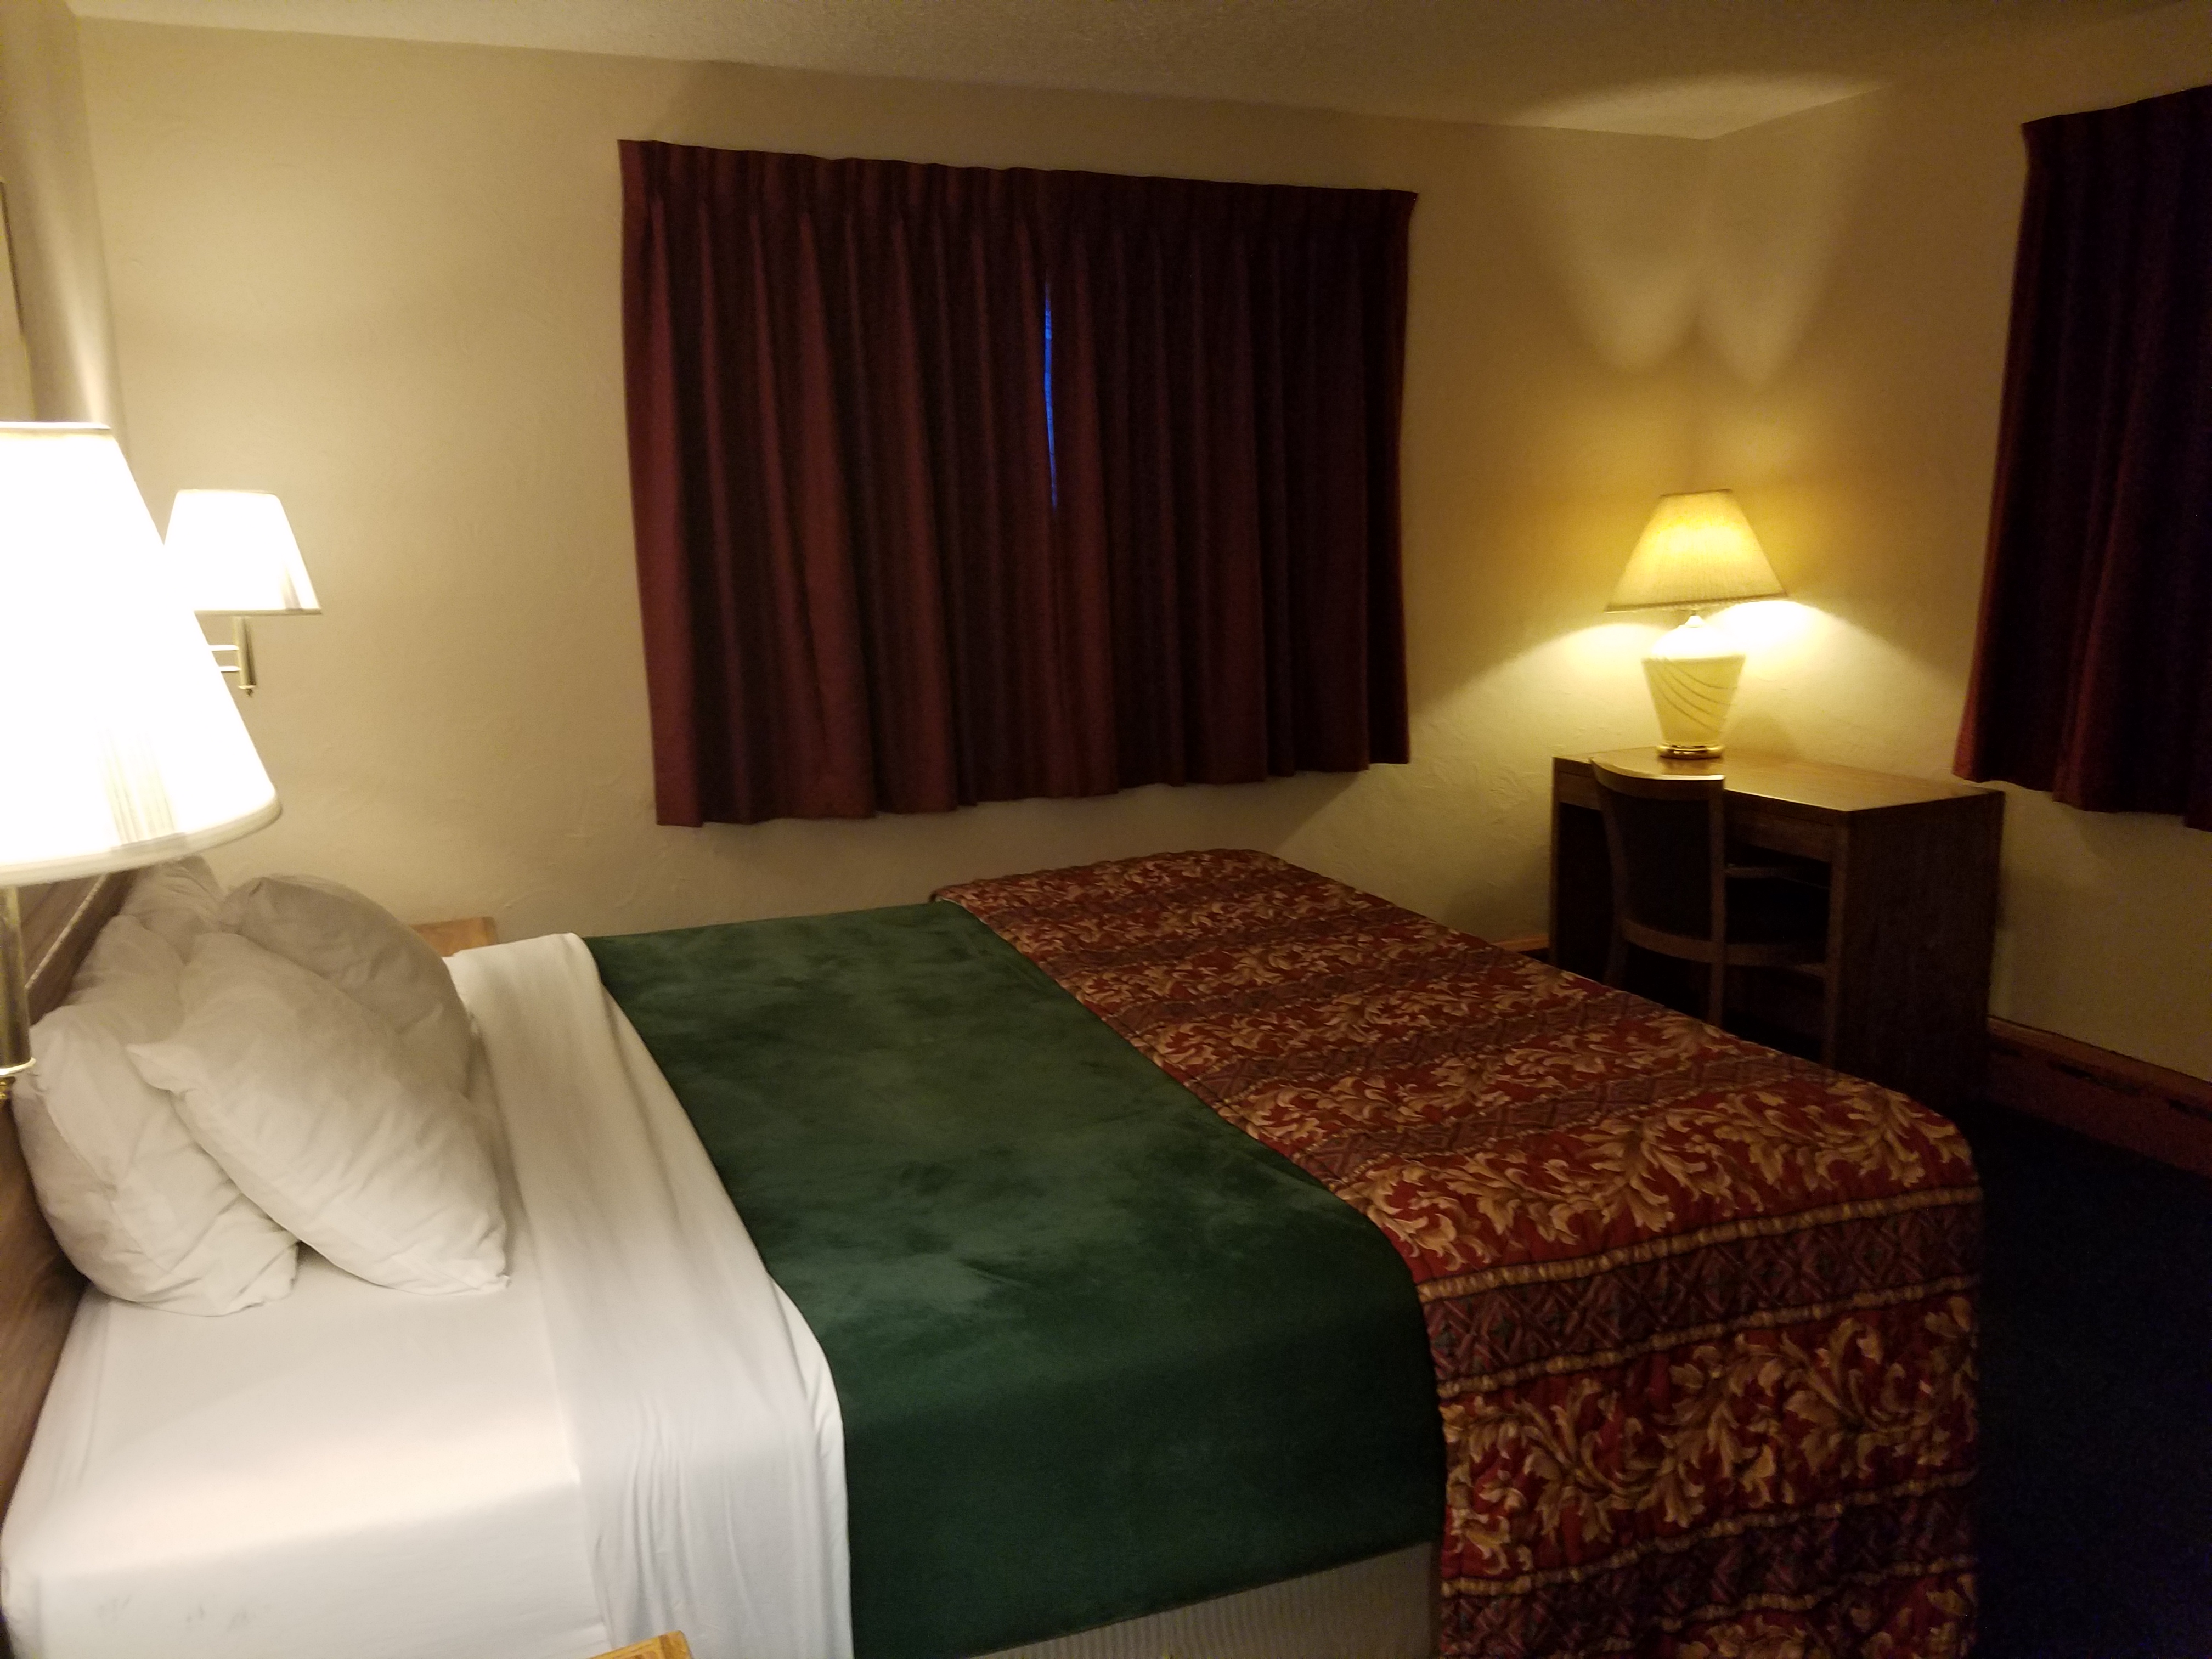 Budget Affordable Lodging Hotels Motels Discount Properties Motel Hotels Great Western Colorado Salida Budget Affordable